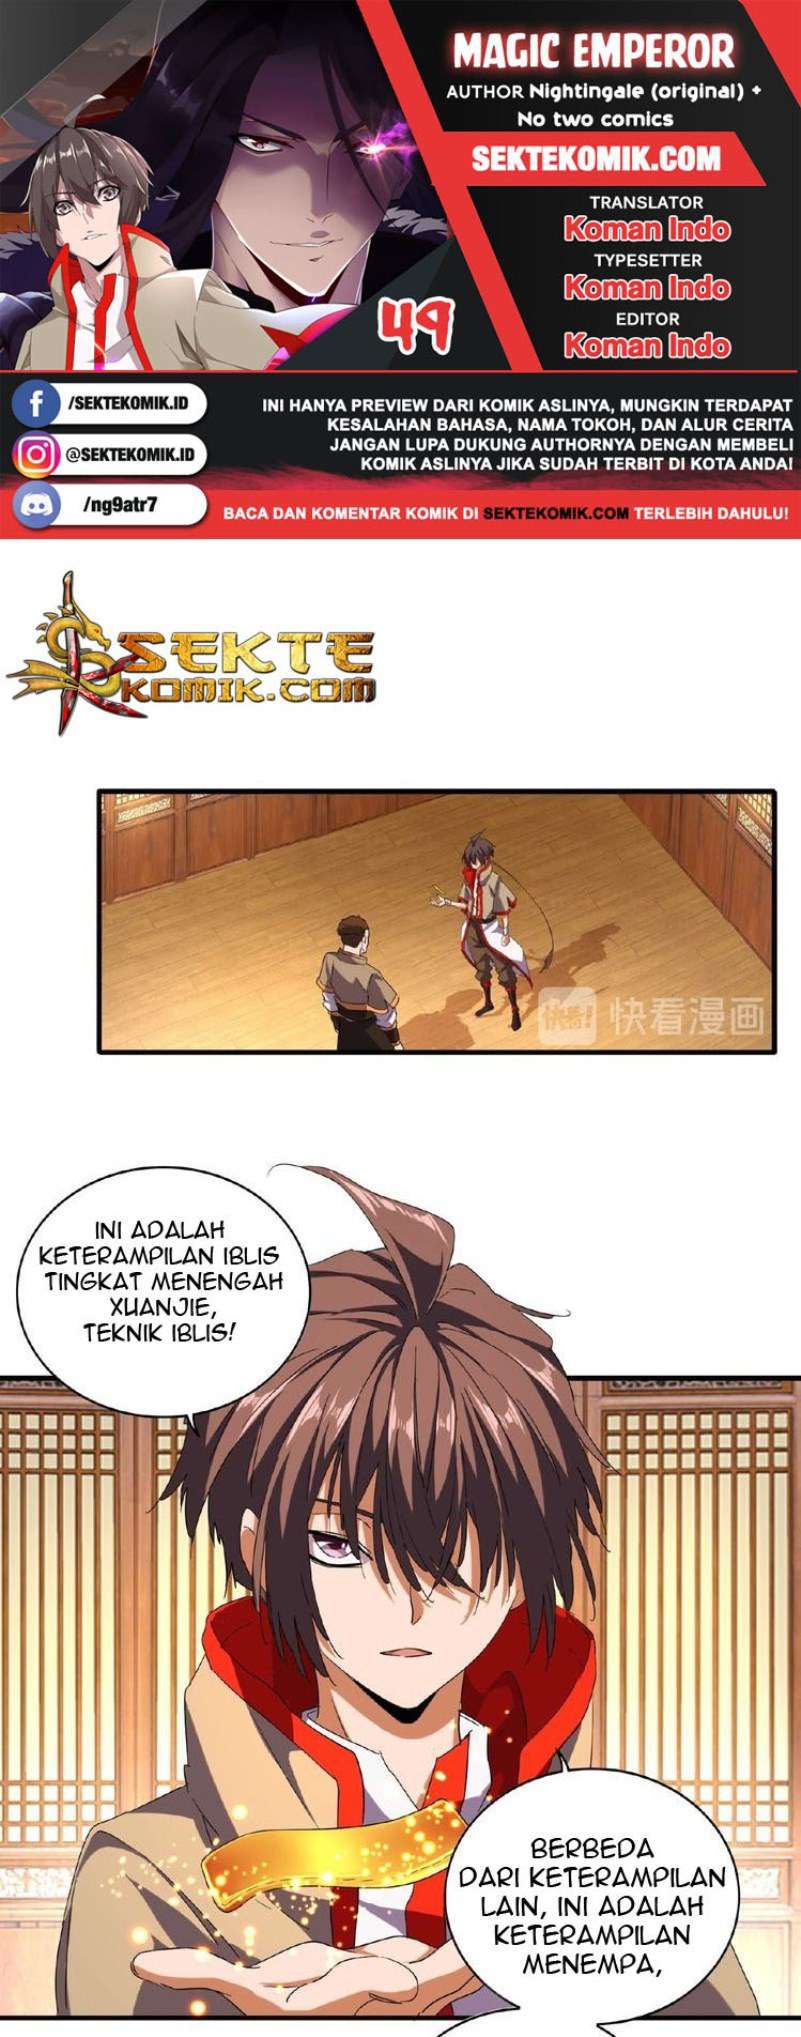 Magic Emperor Chapter 49 Image 0